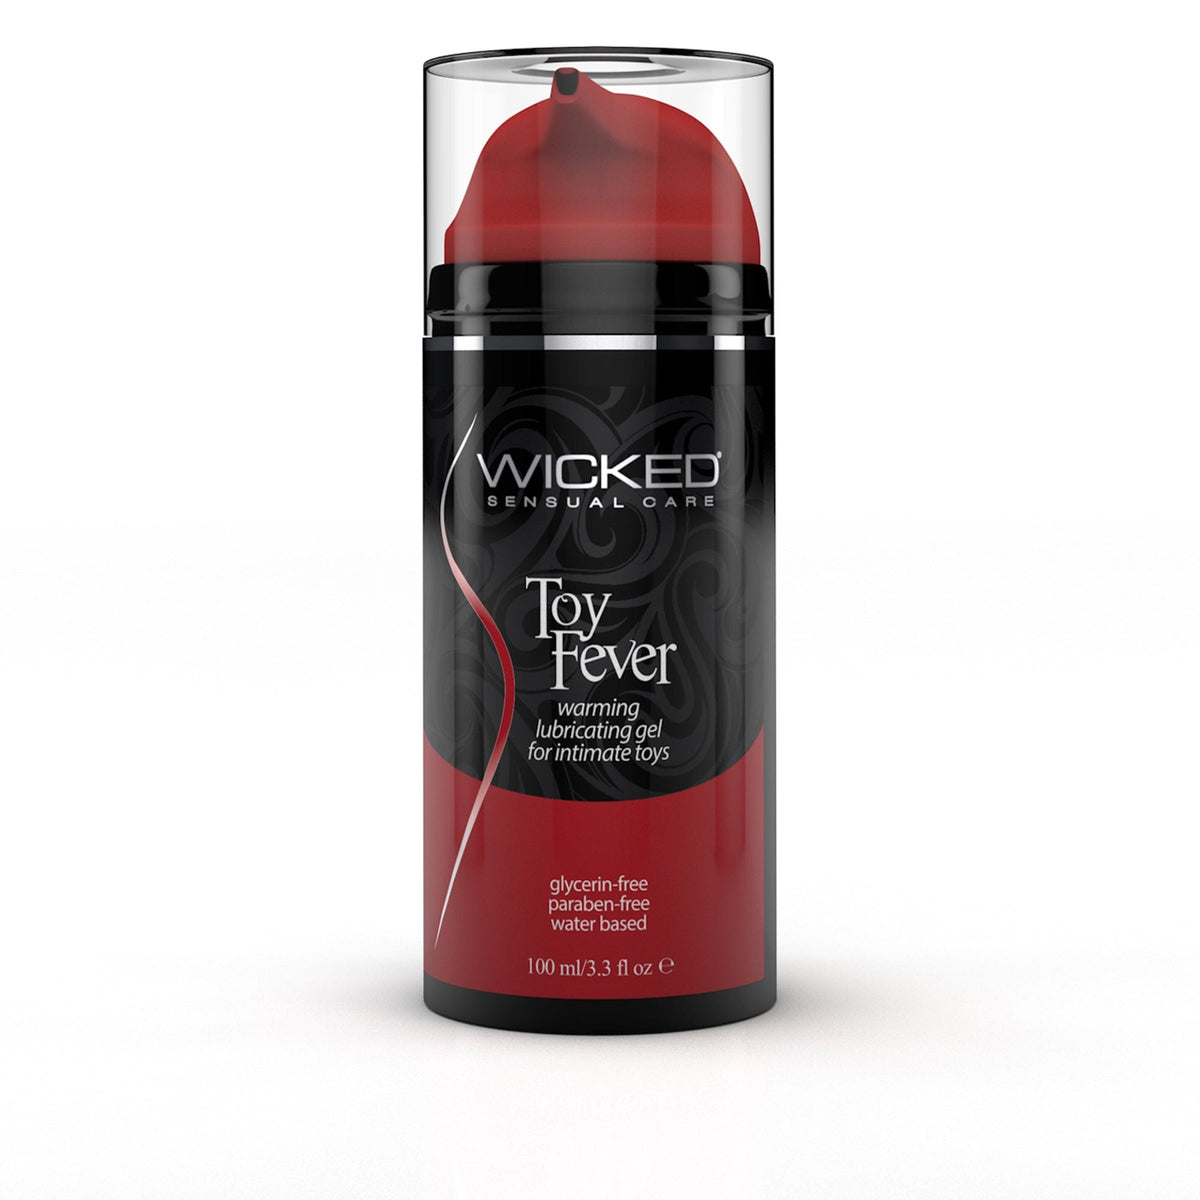 Toy Fever - Warming Gyercin-Free Gel for intimate toys 3.3 \fl oz/100ml Other Wicked   